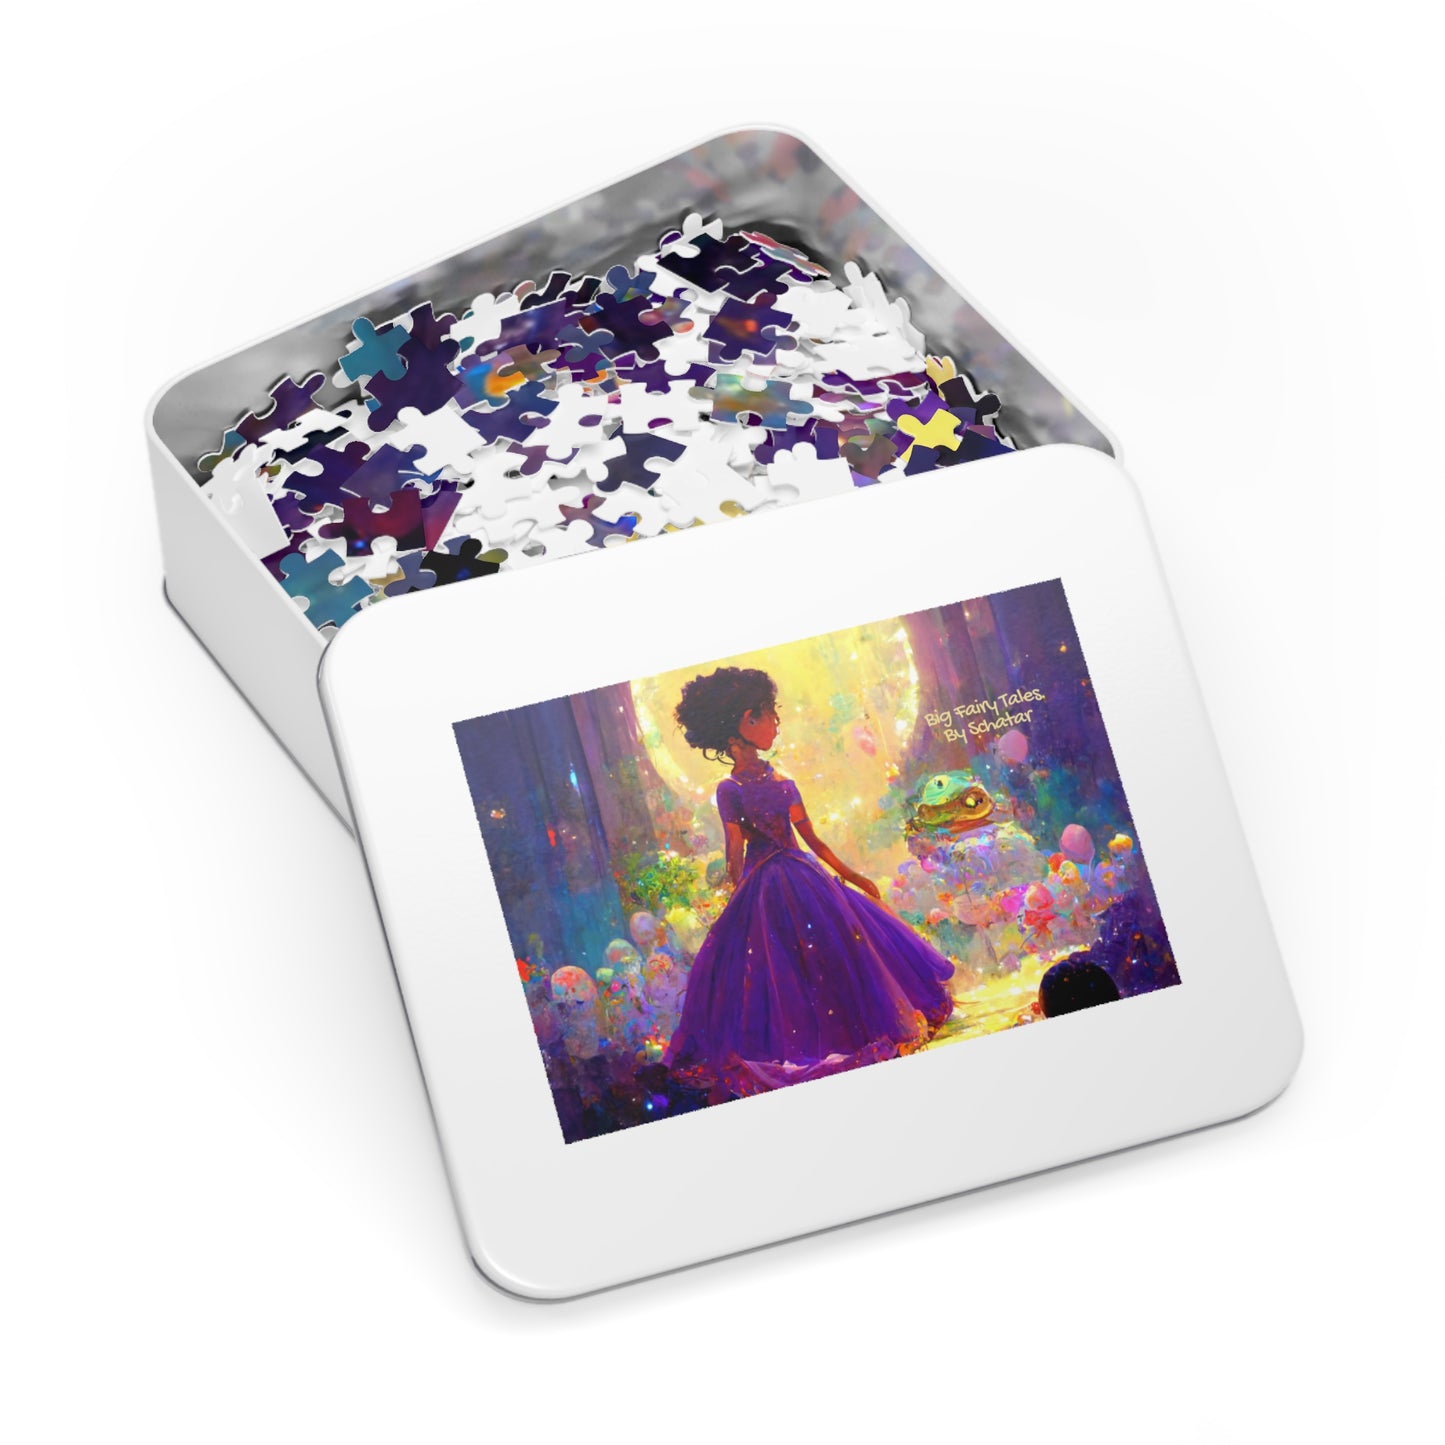 Big Fairy Tales By Schatar - Princess And Frog Prince Puzzle